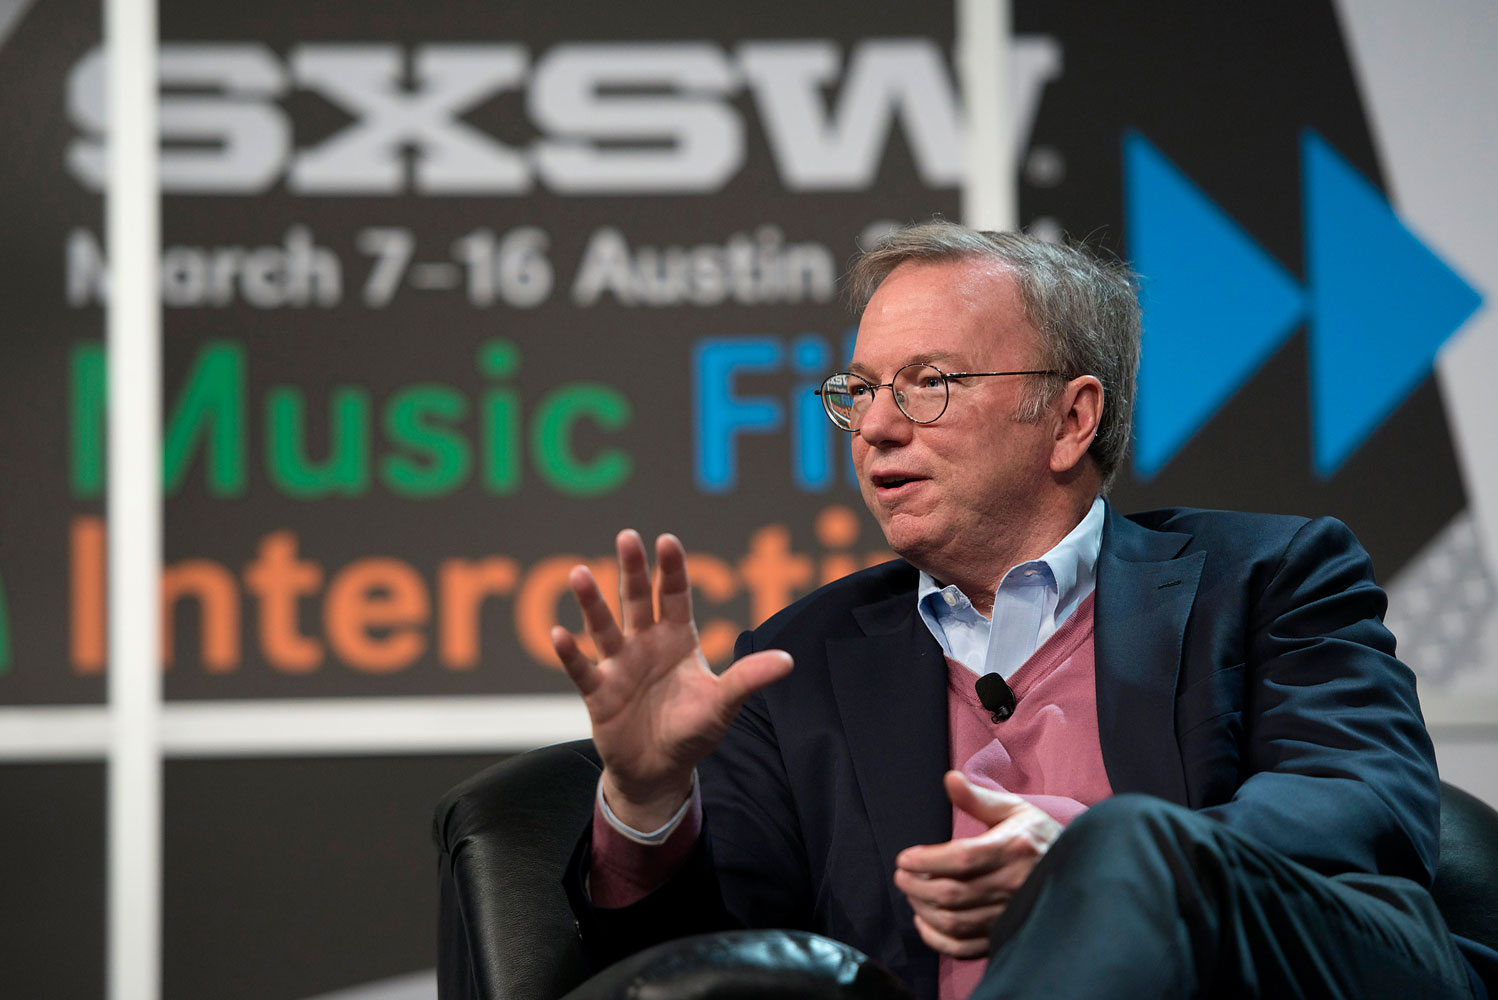 Eric Schmidt, executive chairman of Google Inc., speaks during a featured session called The New Digital Age, at the South By Southwest Interactive Festival in Austin, Texas, March 7, 2014. (David Paul Morris—Bloomberg/Getty Images)